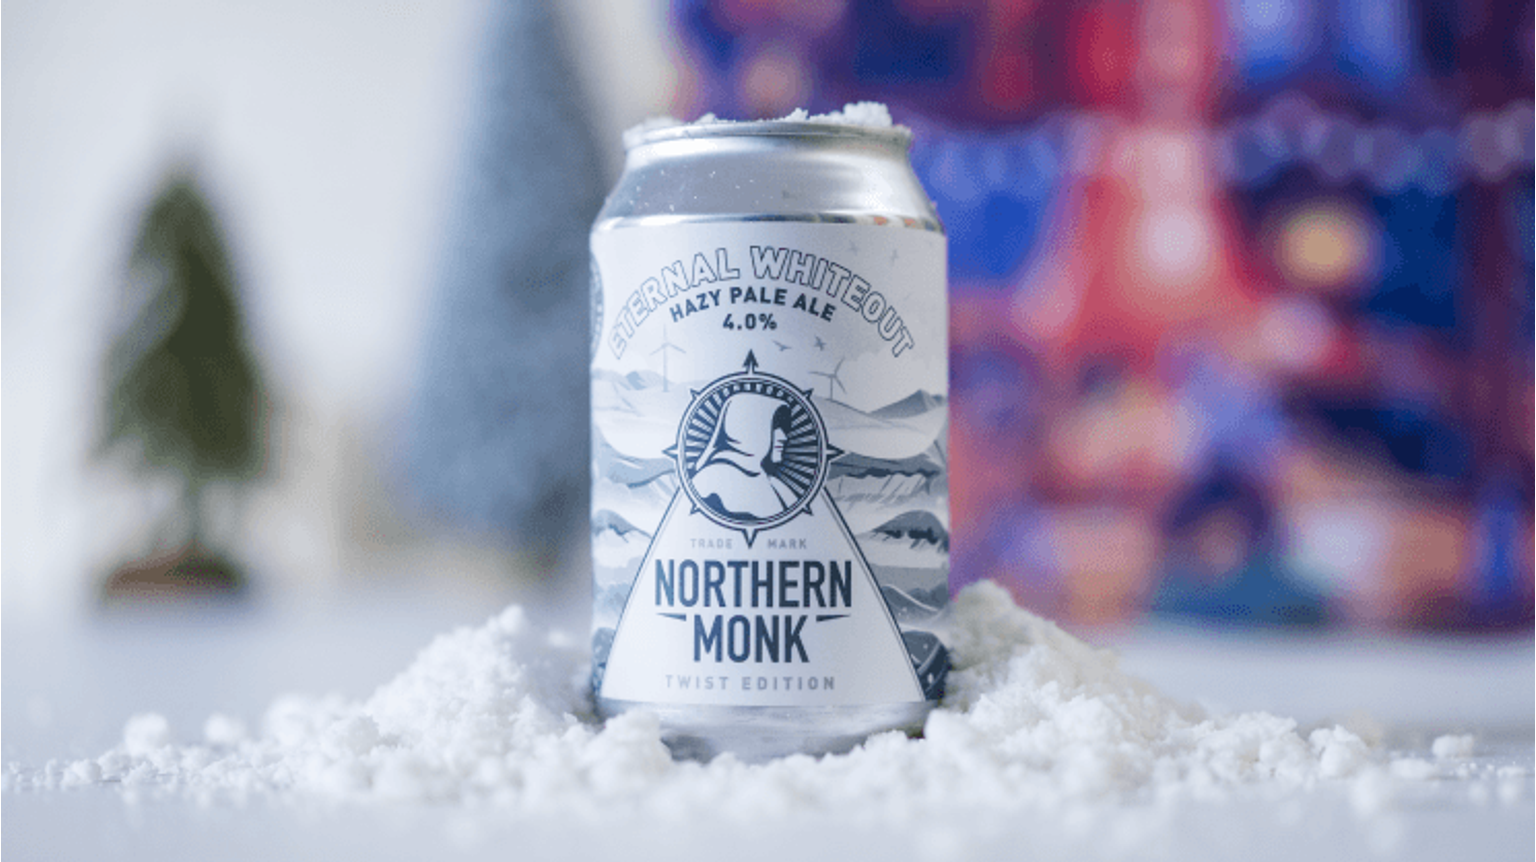 thumbnail for blog article named: Beery Christmas Day 2 : Northern Monk Eternal Whiteout